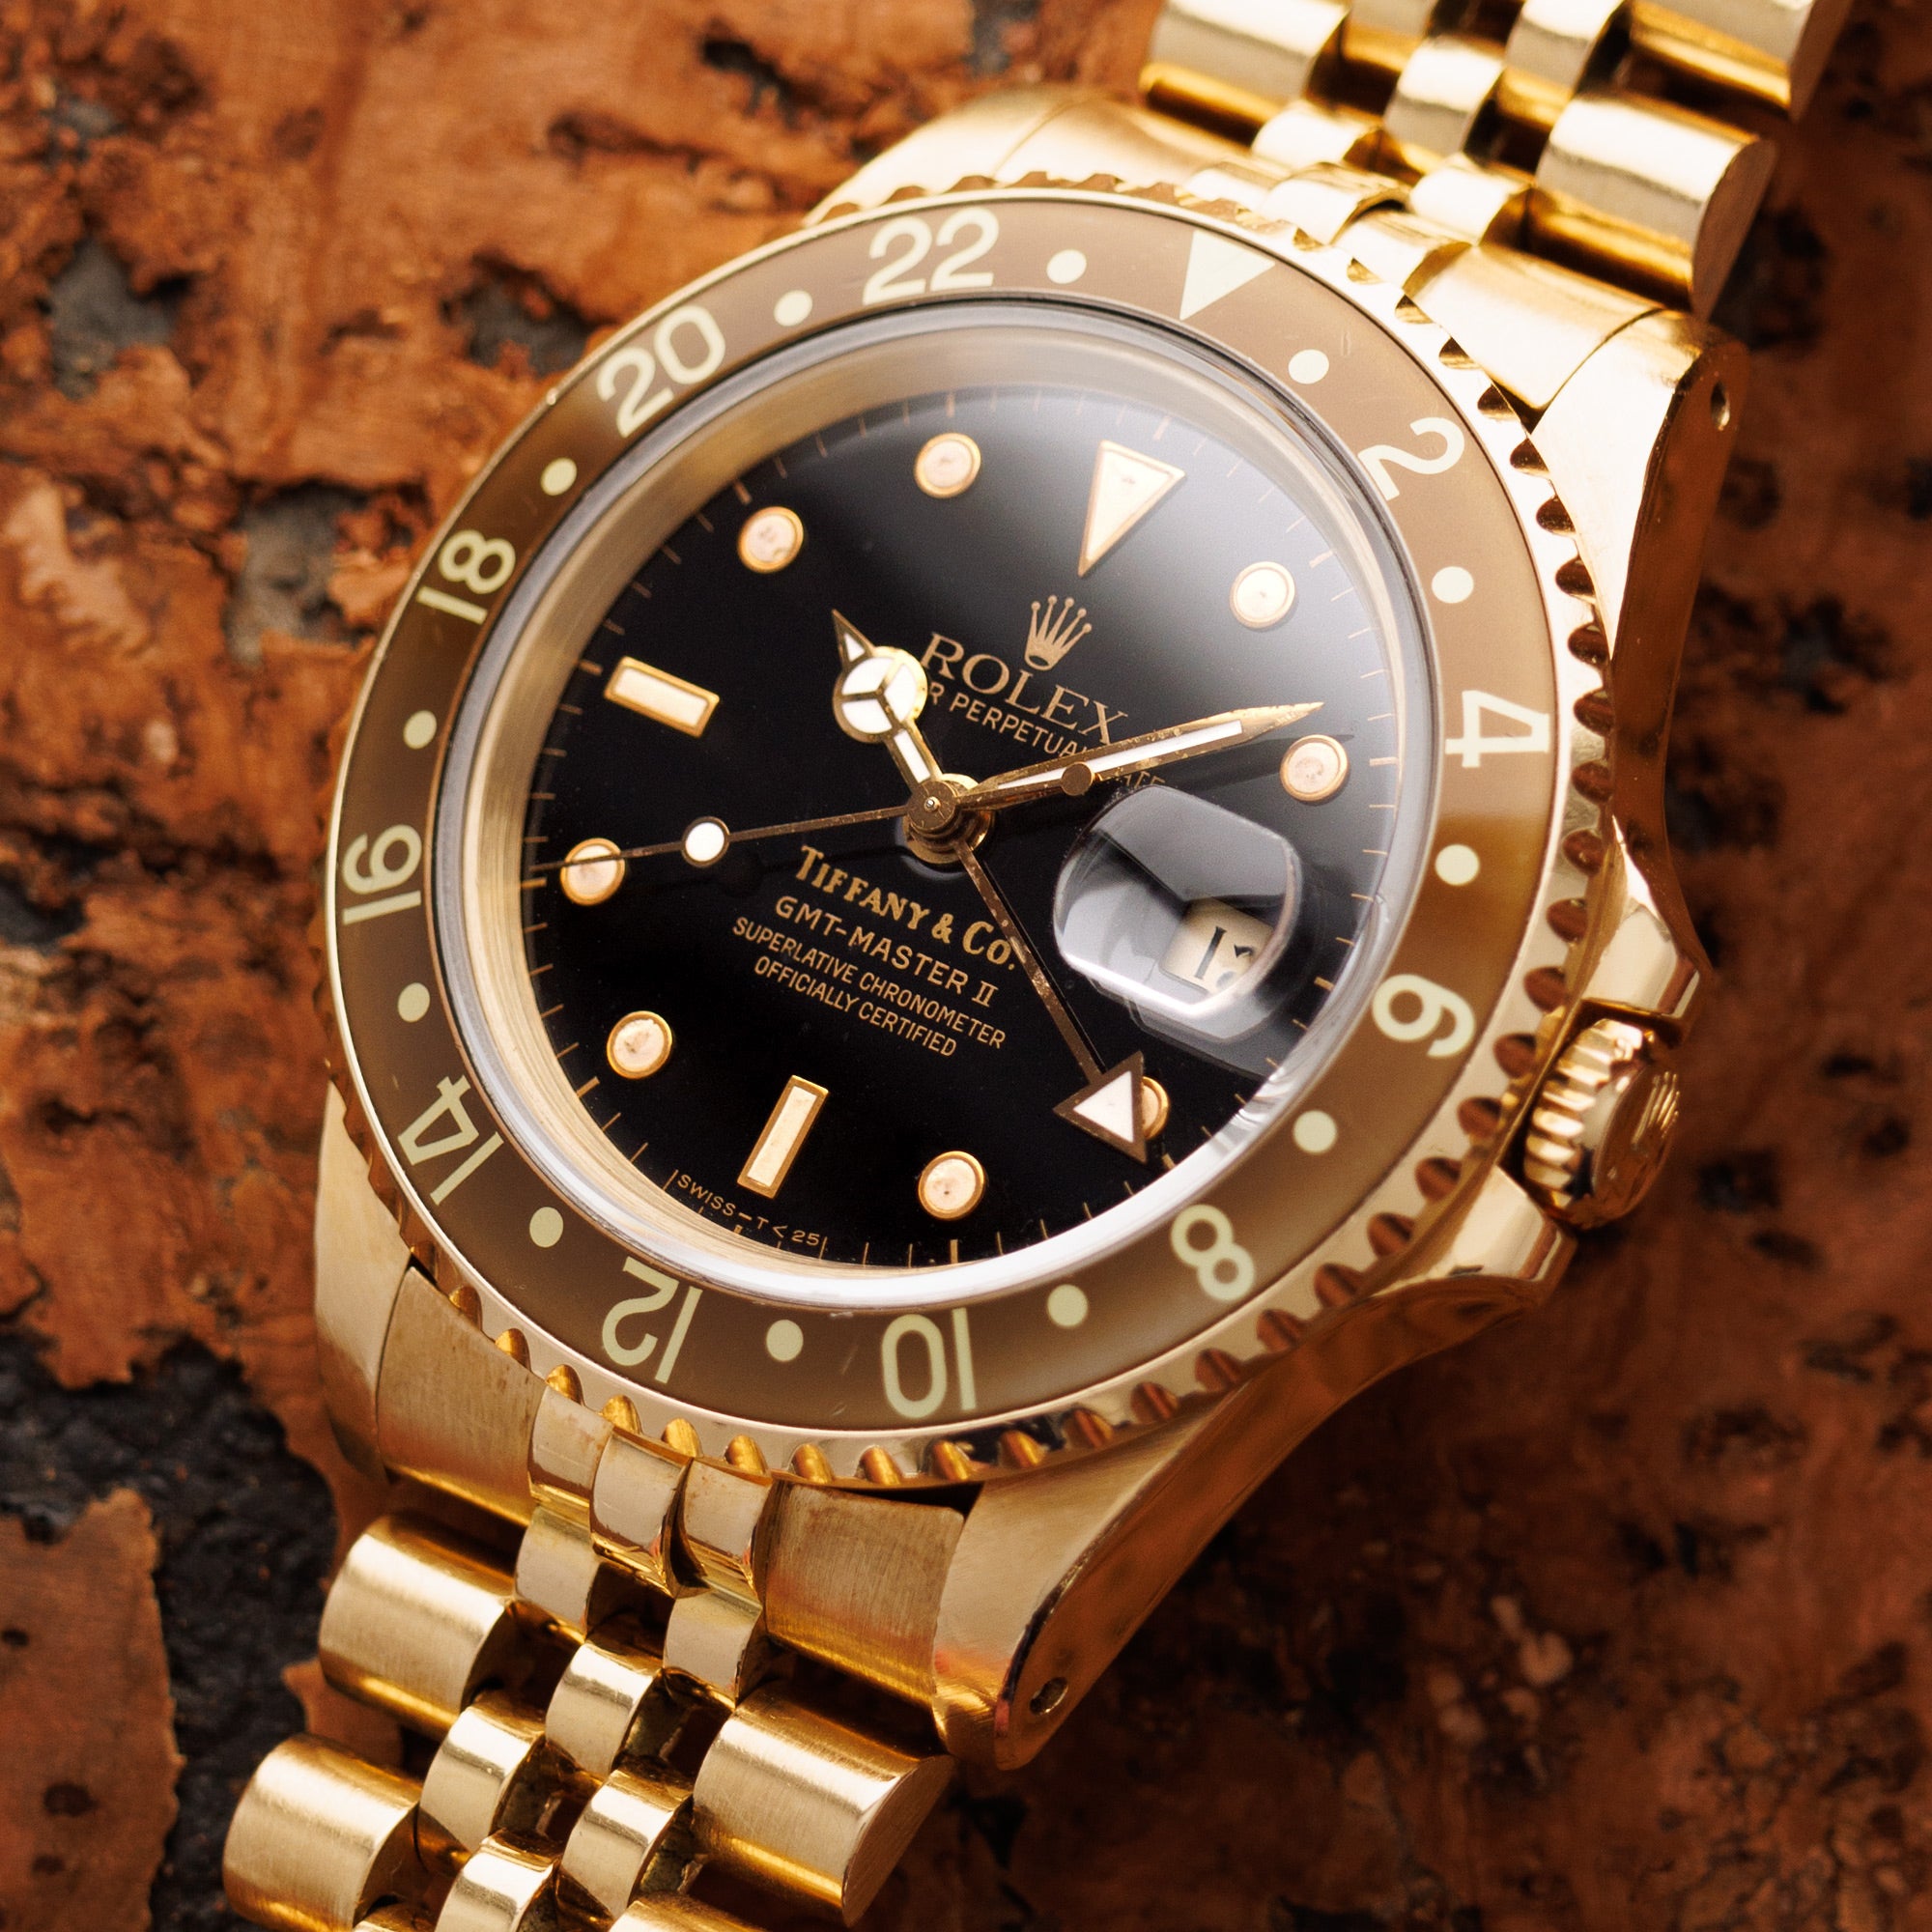 Rolex - Rolex Yellow Gold GMT-Master II Ref. 16718 retailed by Tiffany &amp; Co. - The Keystone Watches